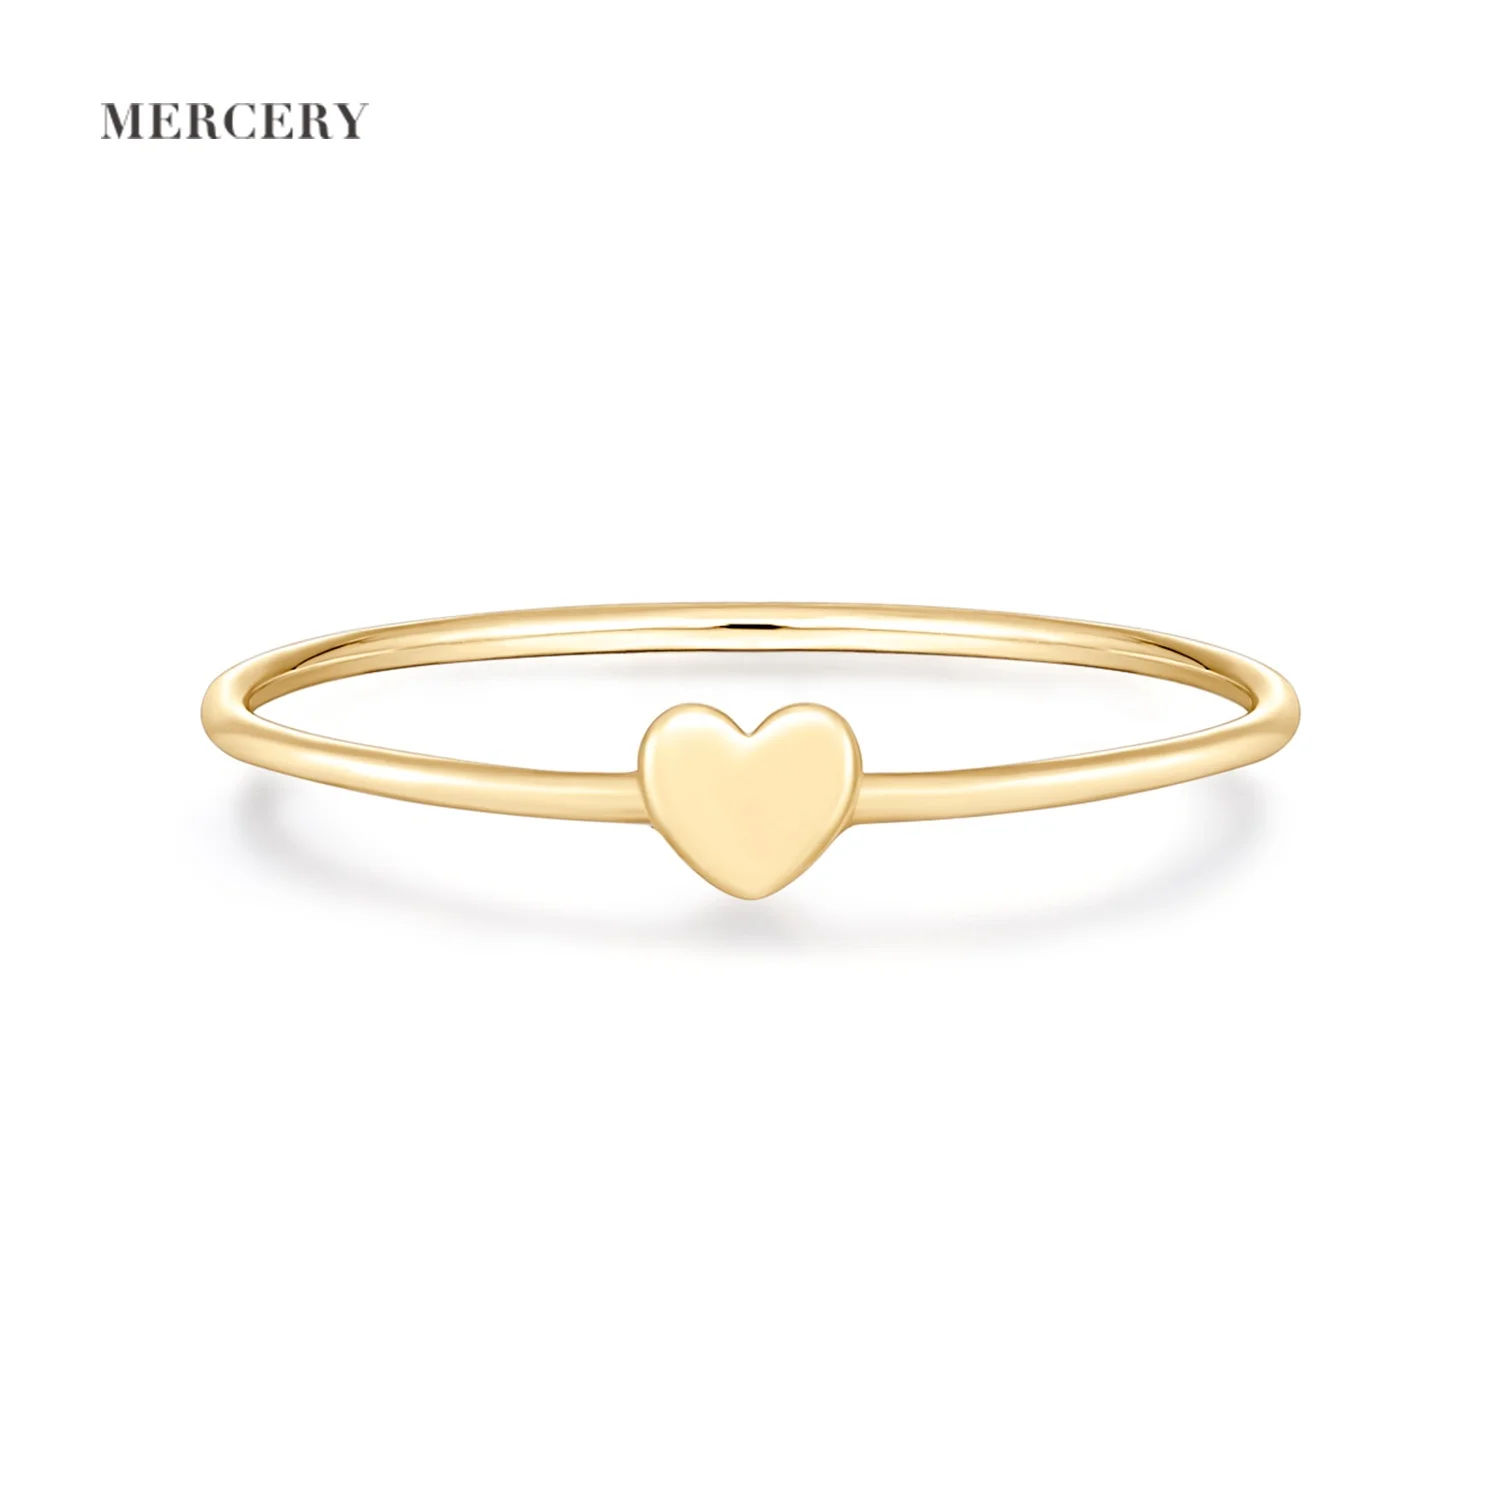 

Mercery Romantic Jewelry Valentine Rings 14k Real Gold Love Heart Ring Solid Gold Wedding Anniversary Jewelry Gifts For Ladies